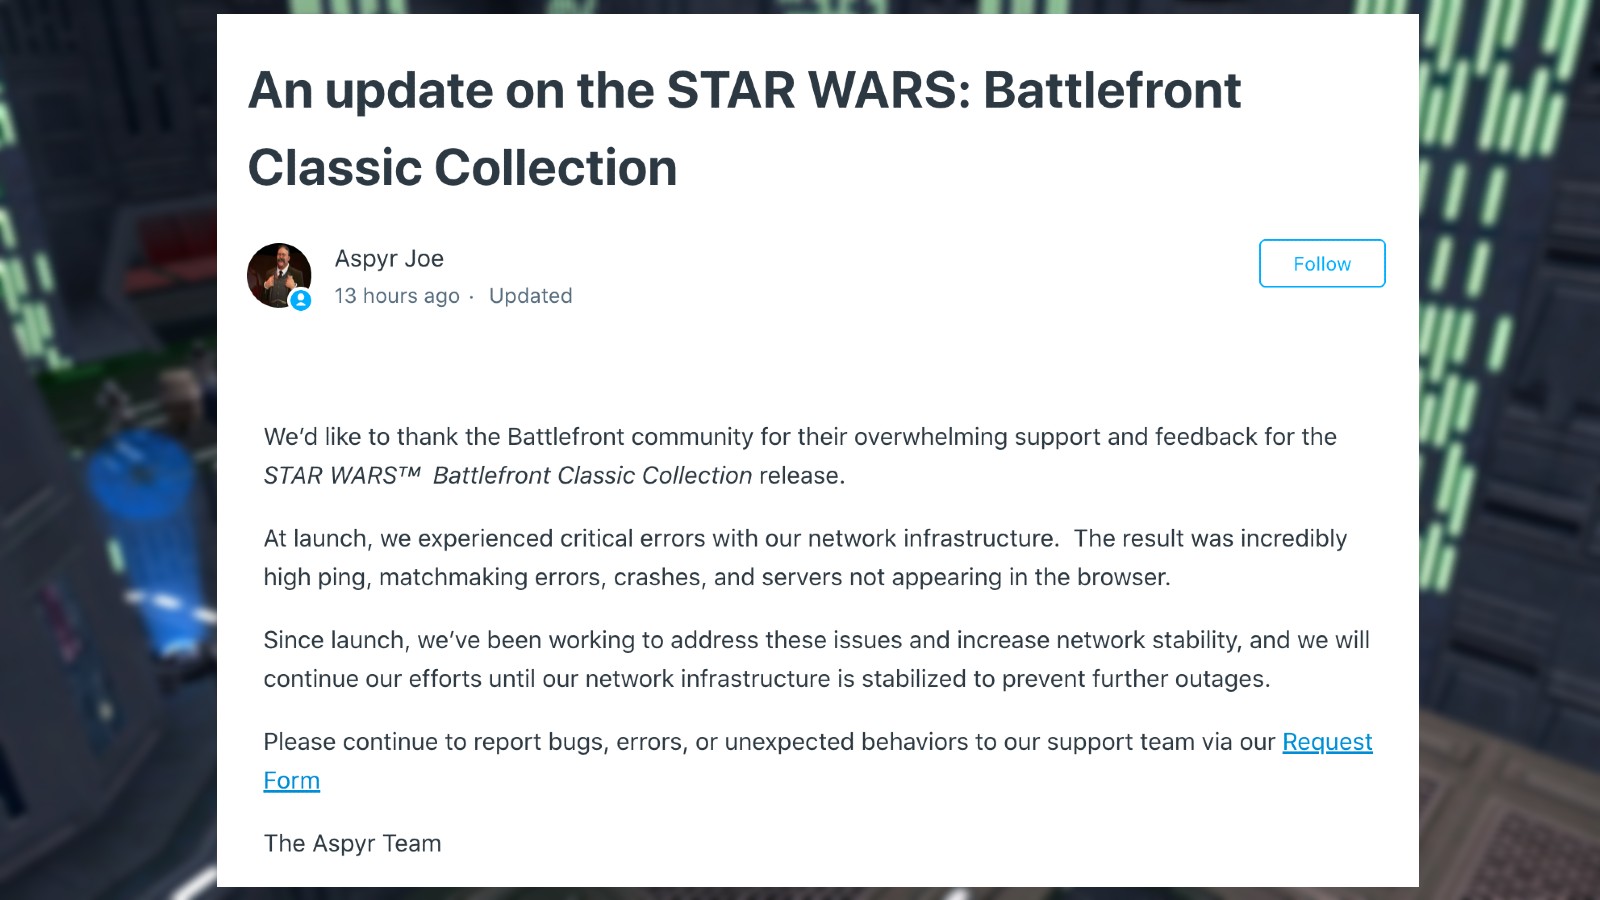 Developer Aspyr's response to disappointing Star Wars Battlefront Classic Collection launch